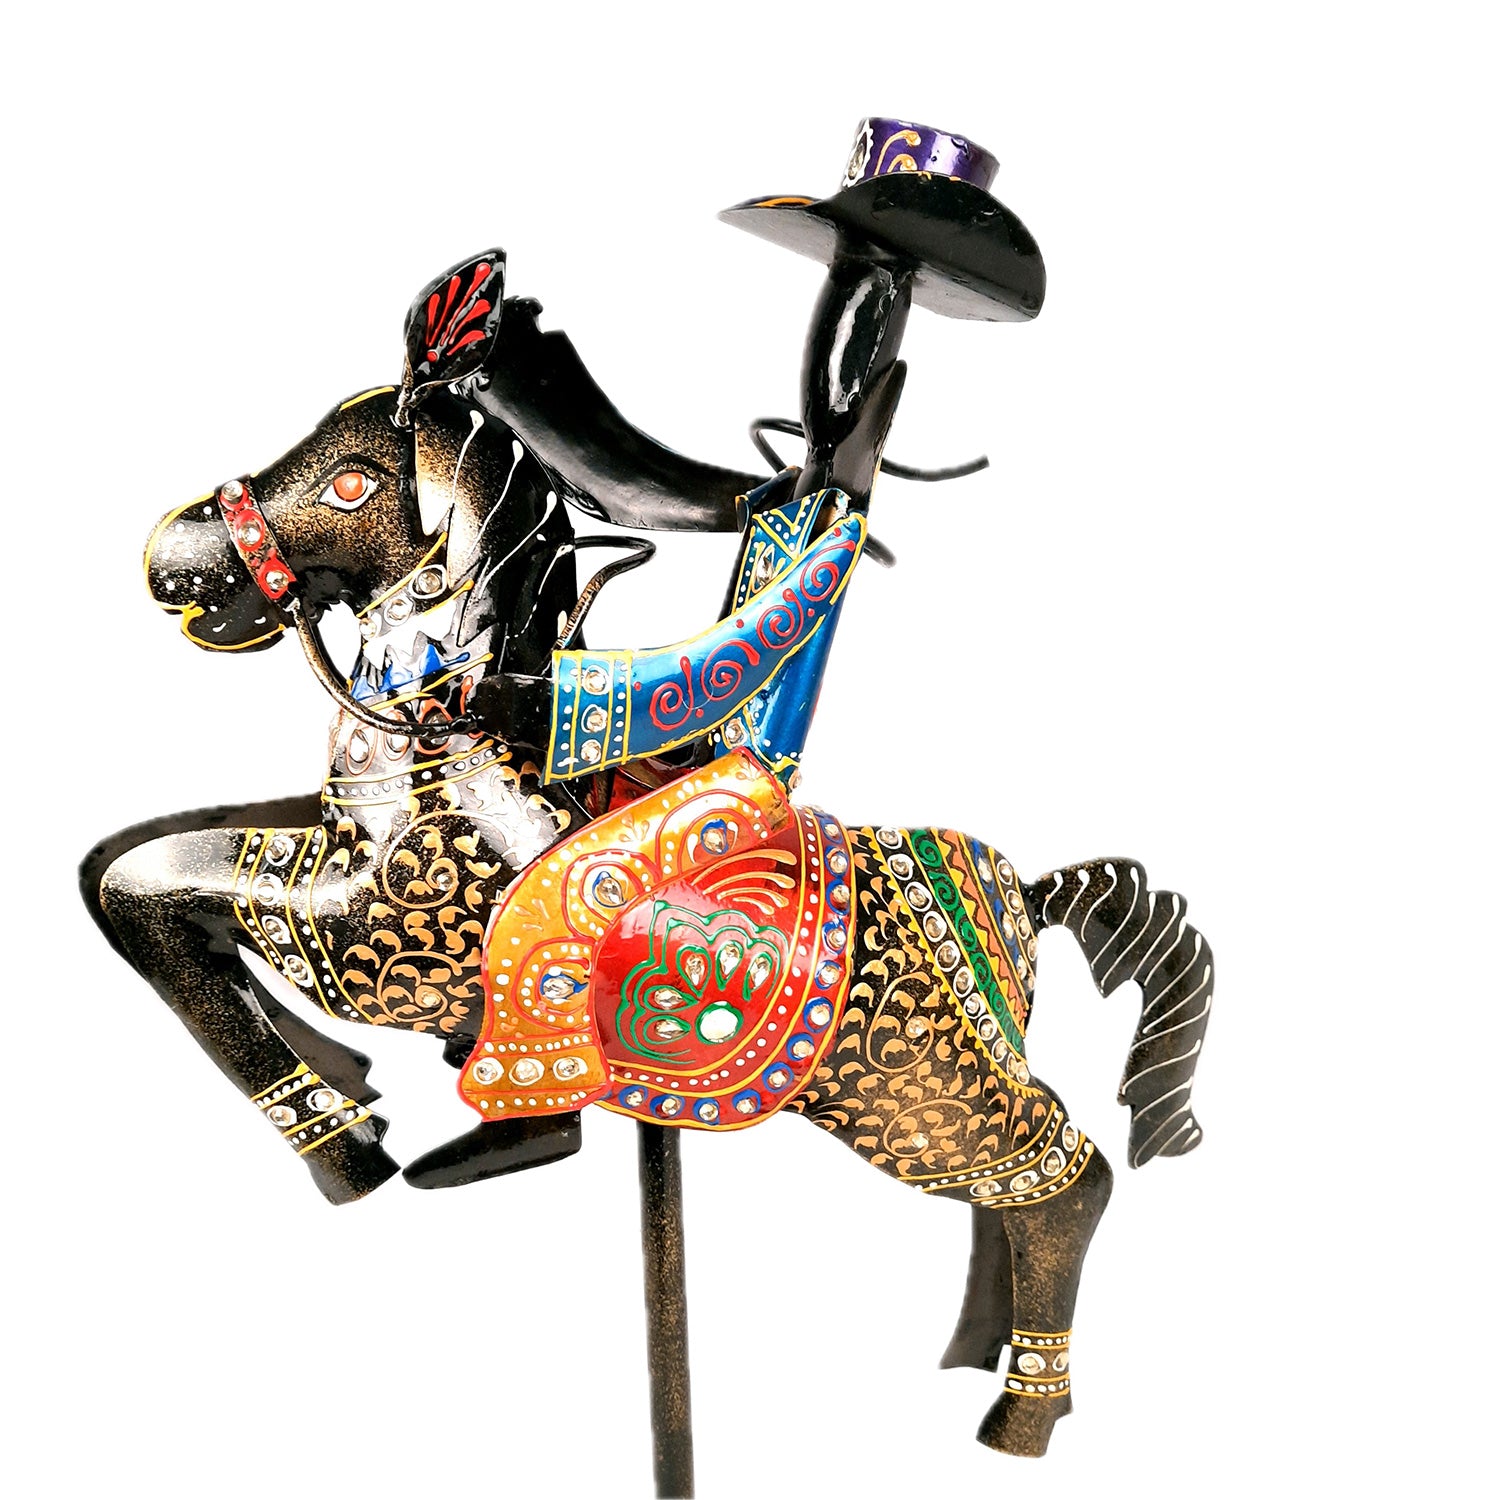 Showpiece - Cowboy Riding On Horse With Hunter Figurine | Decorative Big Show piece - for Home, Corner, Living Room, Office Desk & Table Decor | Gifts For Him - 16 Inch (Set of 2) - Apkamart